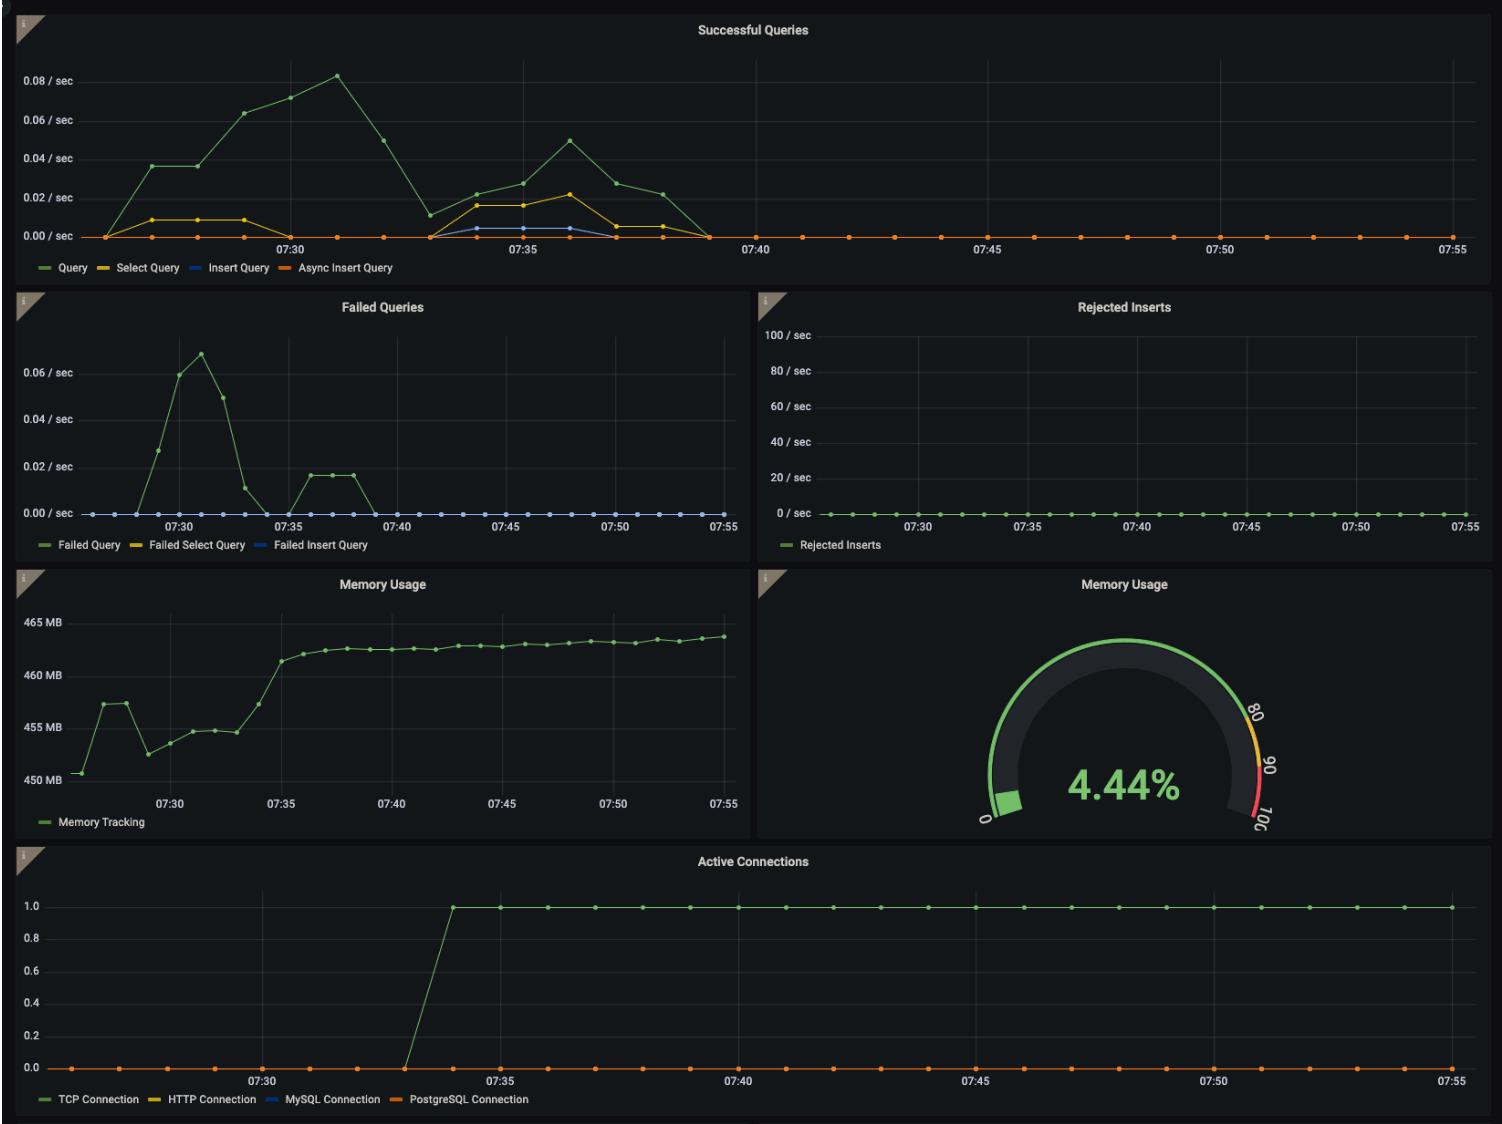 A Grafana Cloud dashboard for ClickHouse displays time series data about successful and failed queries, rejected inserts, memory usage, and active connections.